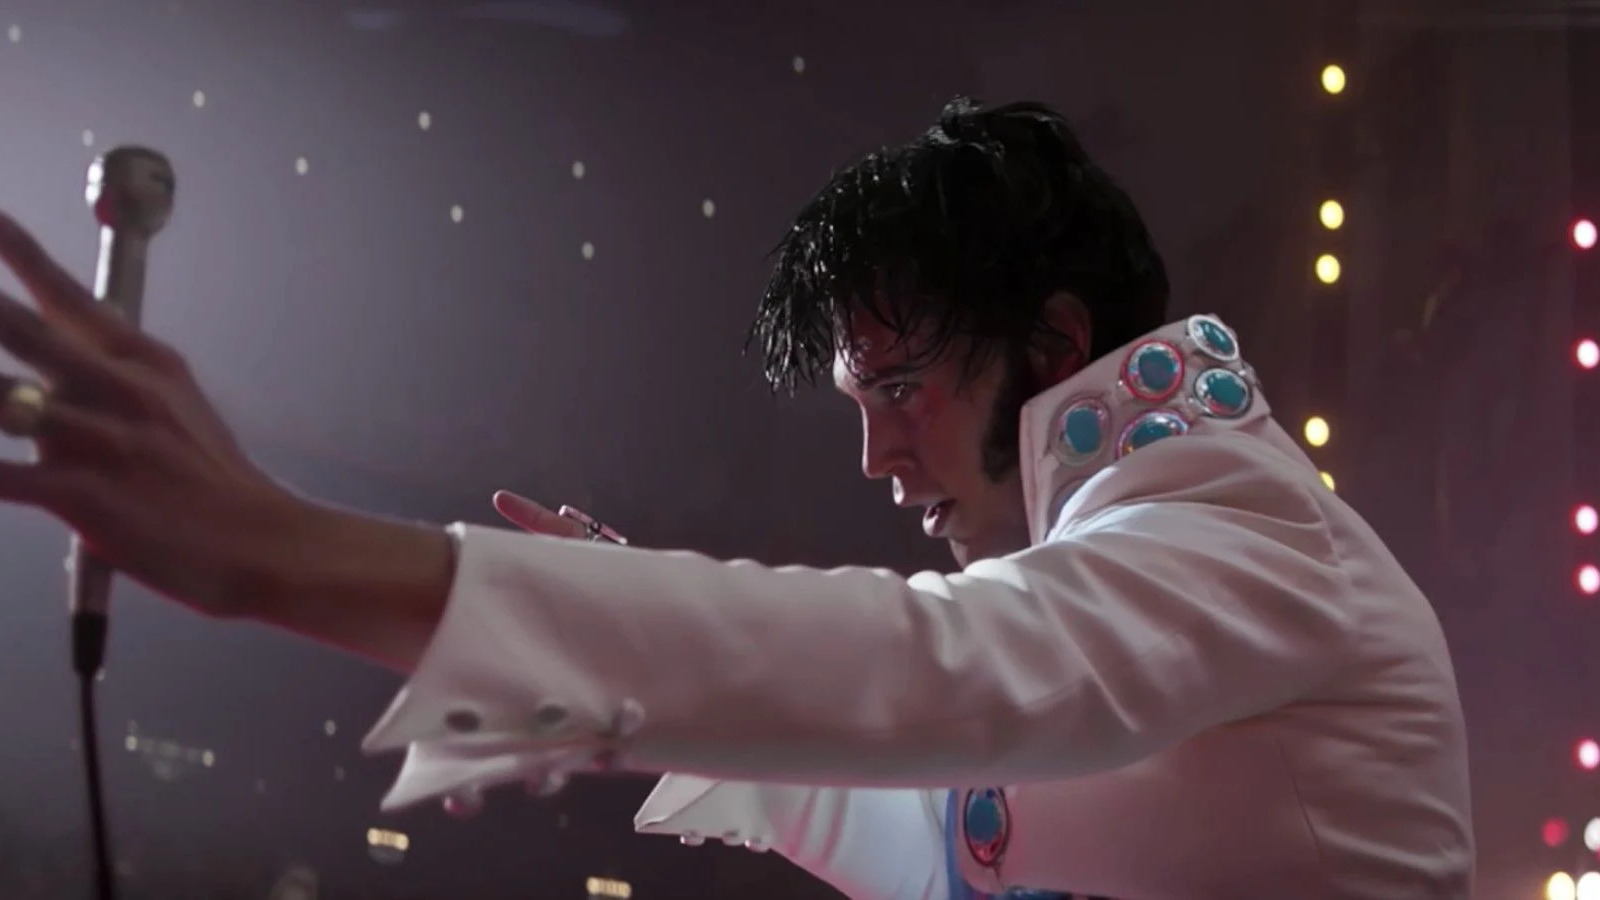 An electric and excessive musical biopic that looks like a comic book movie [Cannes]